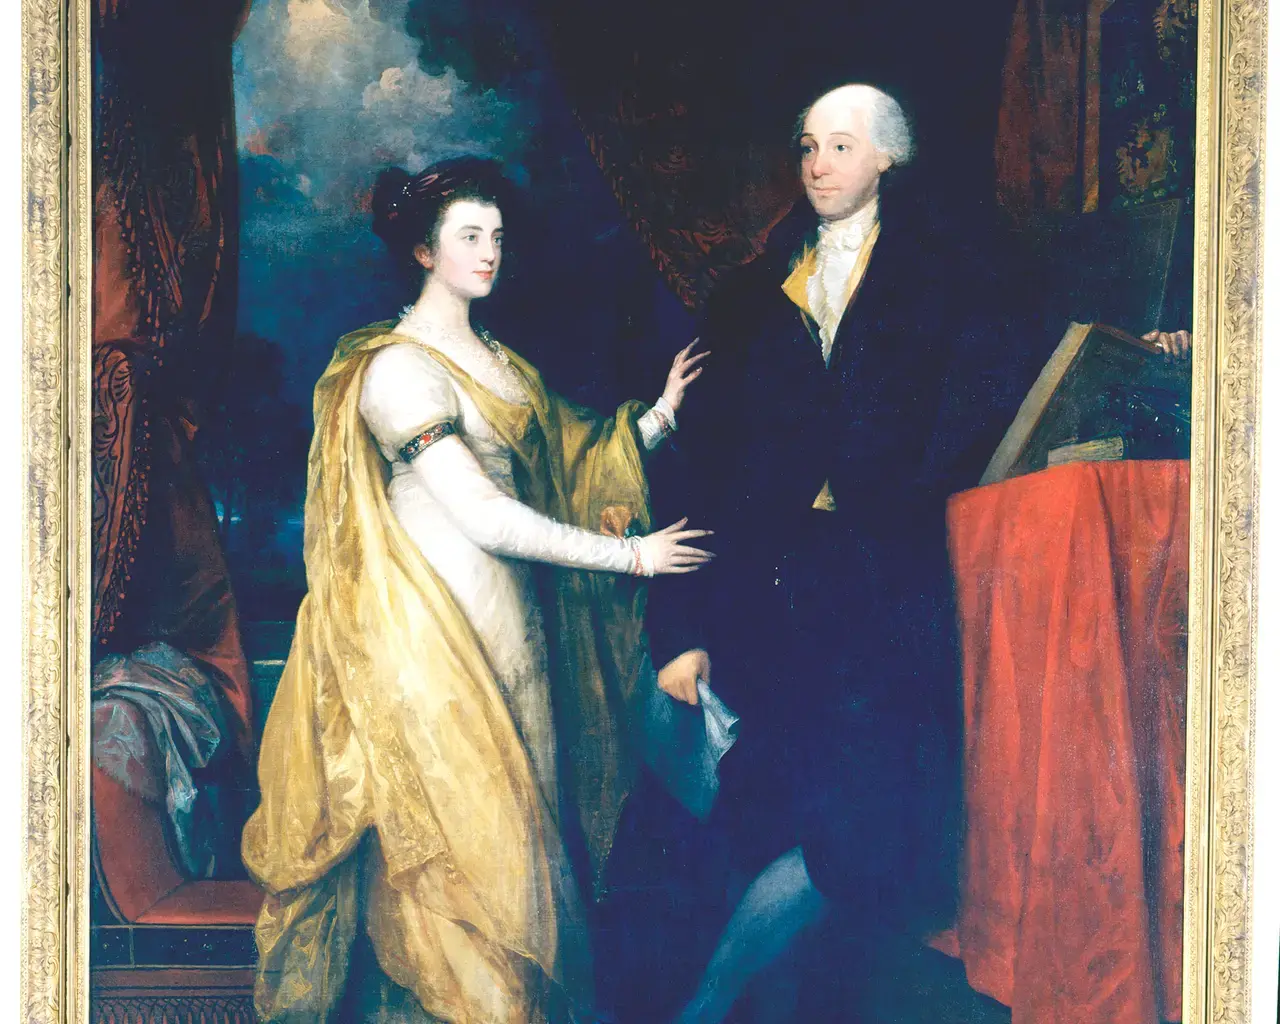 Benjamin West, Portrait of William Hamilton and Ann Hamilton Lyle, 1812, oil on canvas. This is the only known portrait of William Hamilton, depicted here with his niece. Photo courtesy of the Historical Society of Pennsylvania Art and Artifact collection.